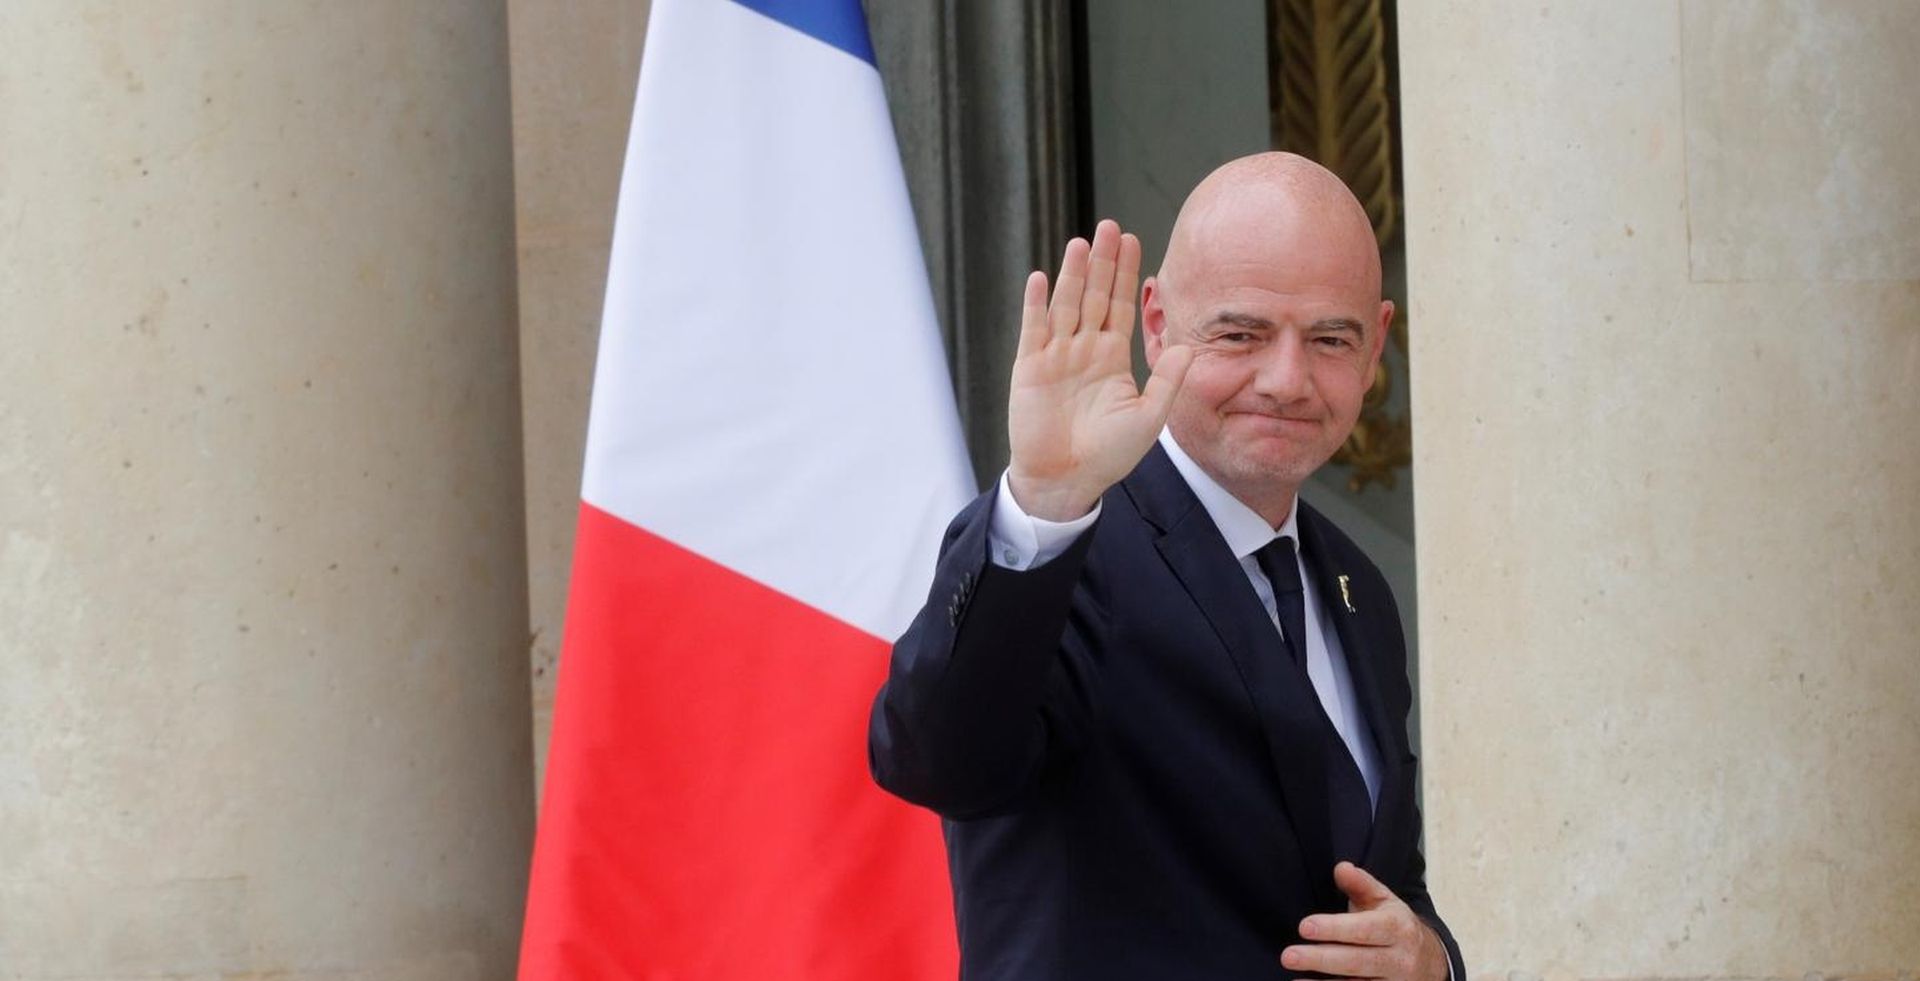 FIFA President Gianni Infantino arrives for a meeting at the Elysee Palace in Paris FIFA President Gianni Infantino arrives for a meeting at the Elysee Palace in Paris, France, June 4, 2019.  REUTERS/Philippe Wojazer PHILIPPE WOJAZER